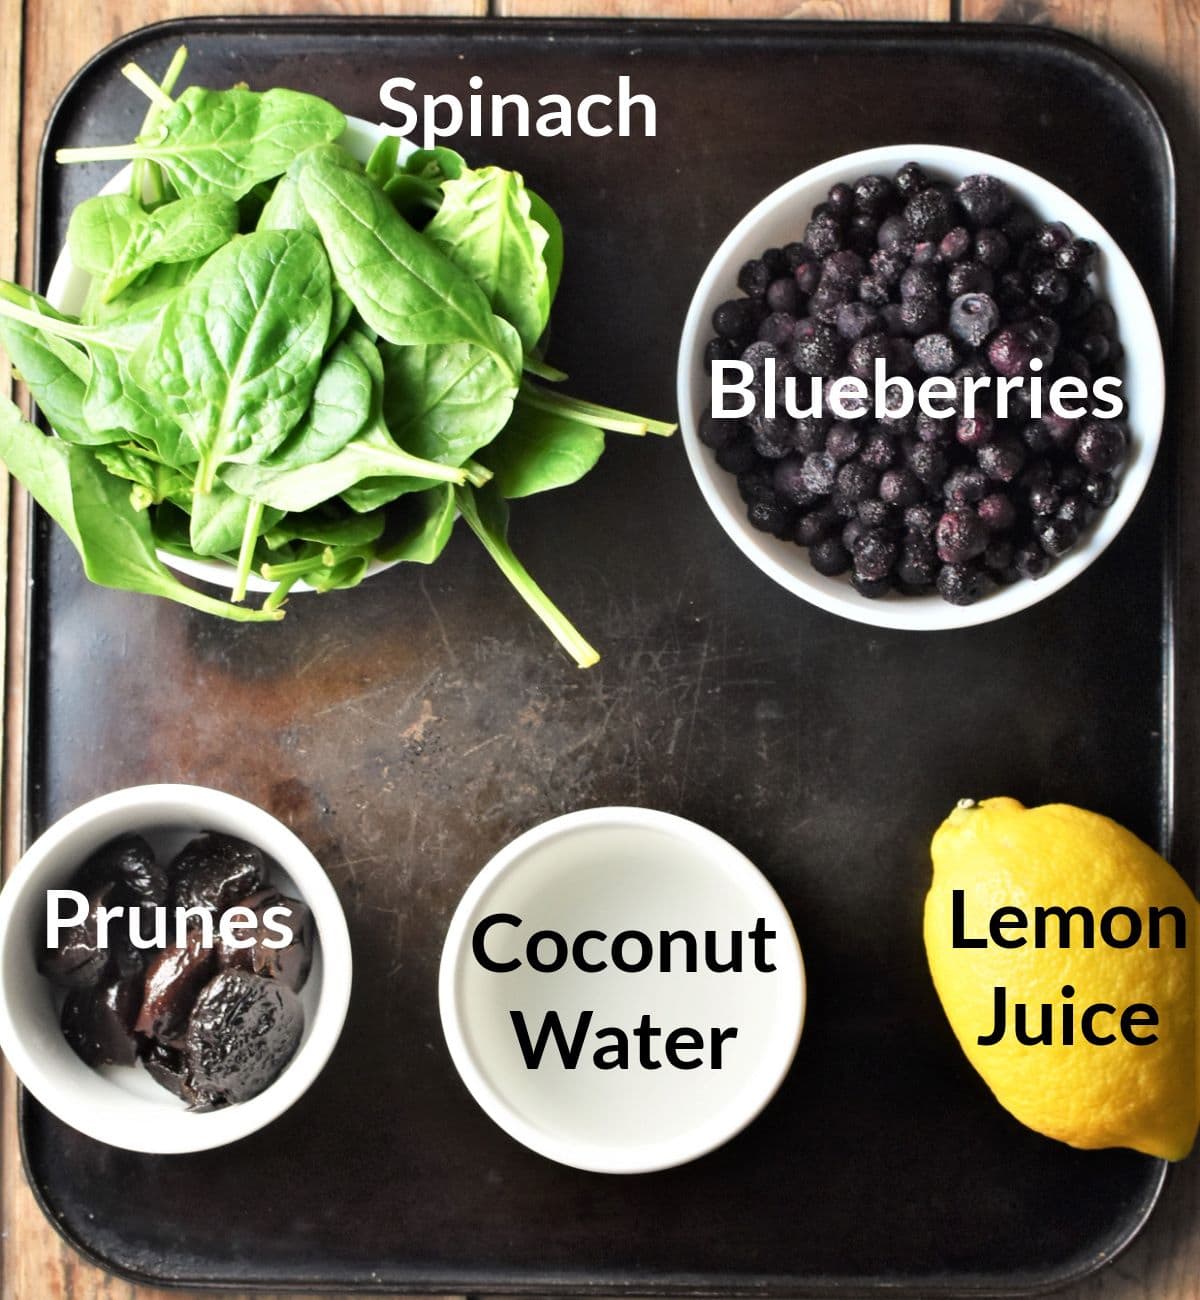 Ingredients for making spinach and blueberry smoothie in individual dishes.